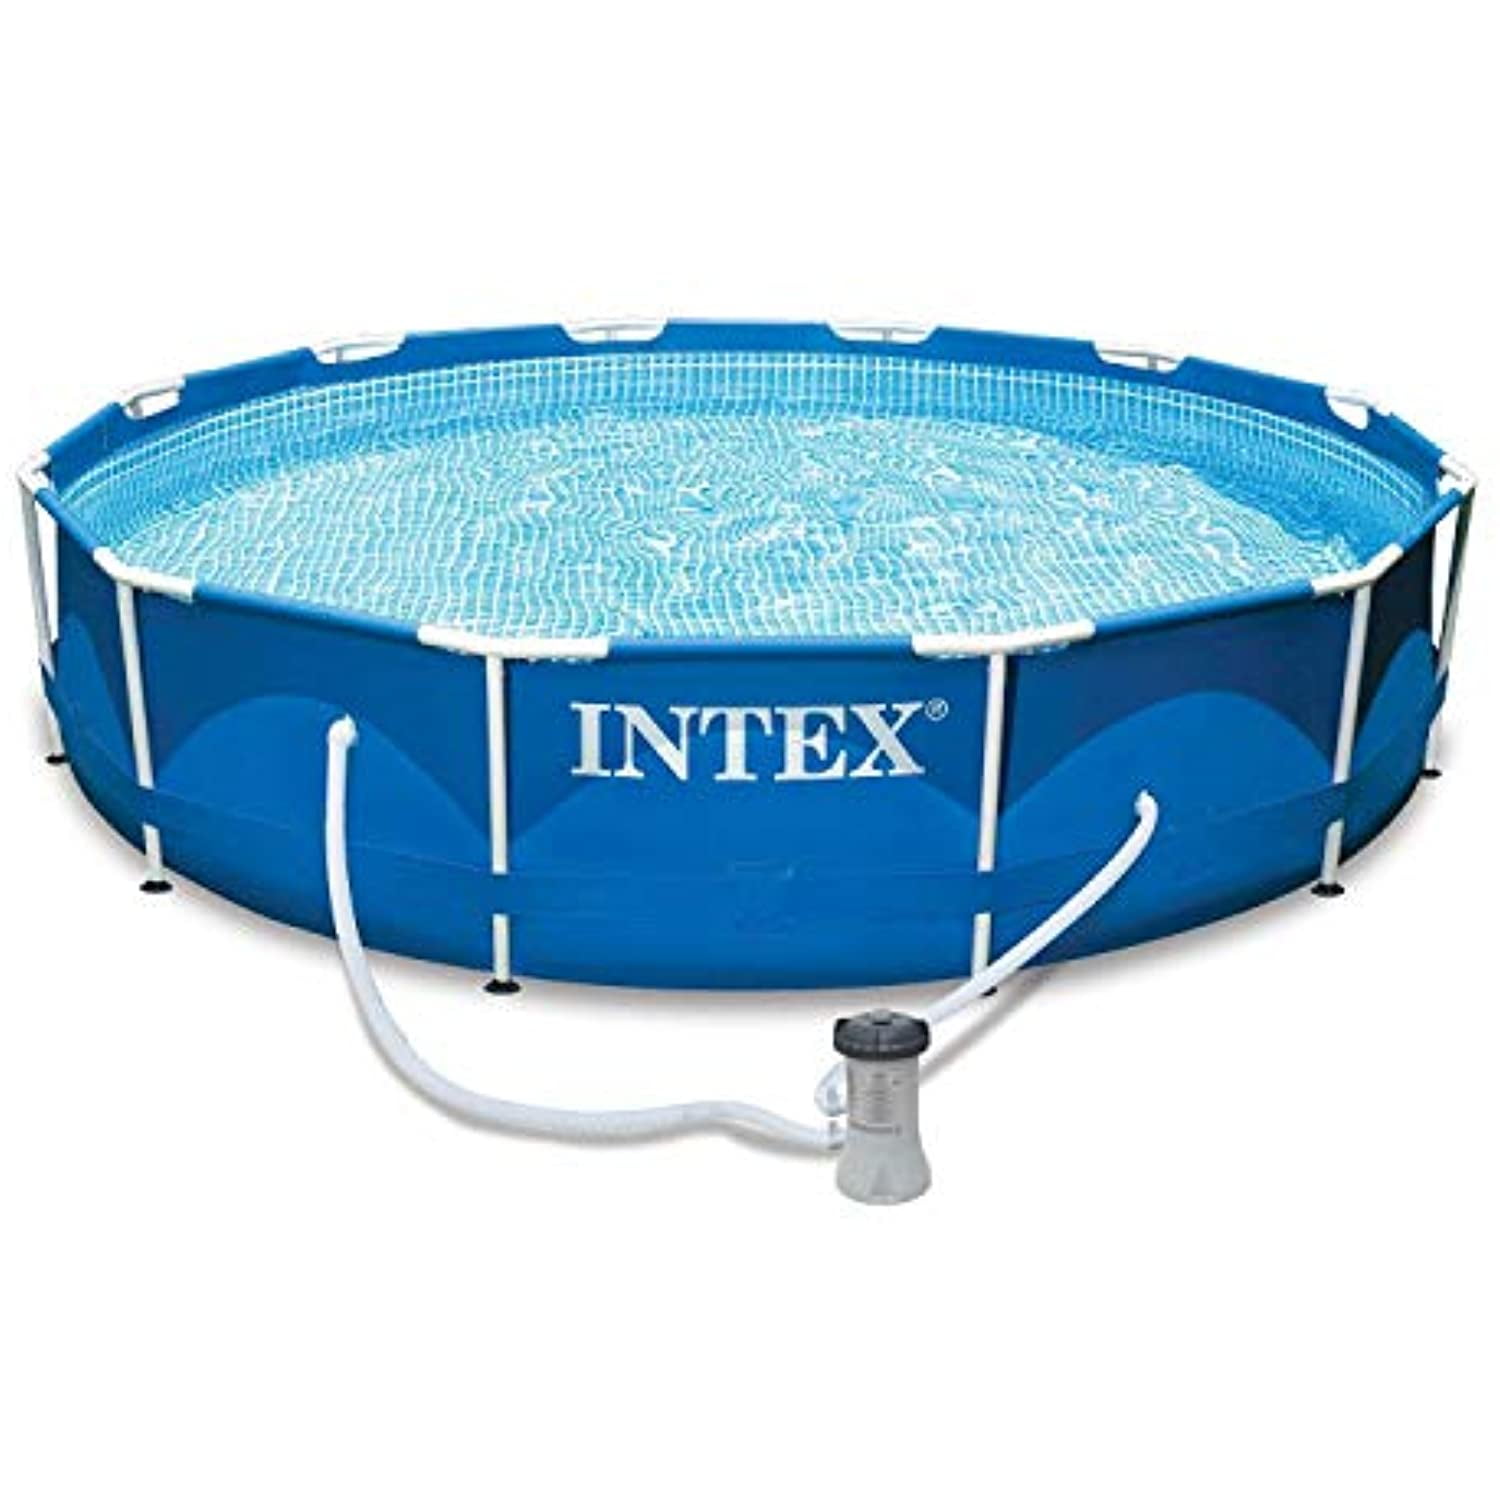 Intex 12 Ft x 30 Inches Frame Set Above Ground Swimming Pool with Filter & Cover - Walmart.com